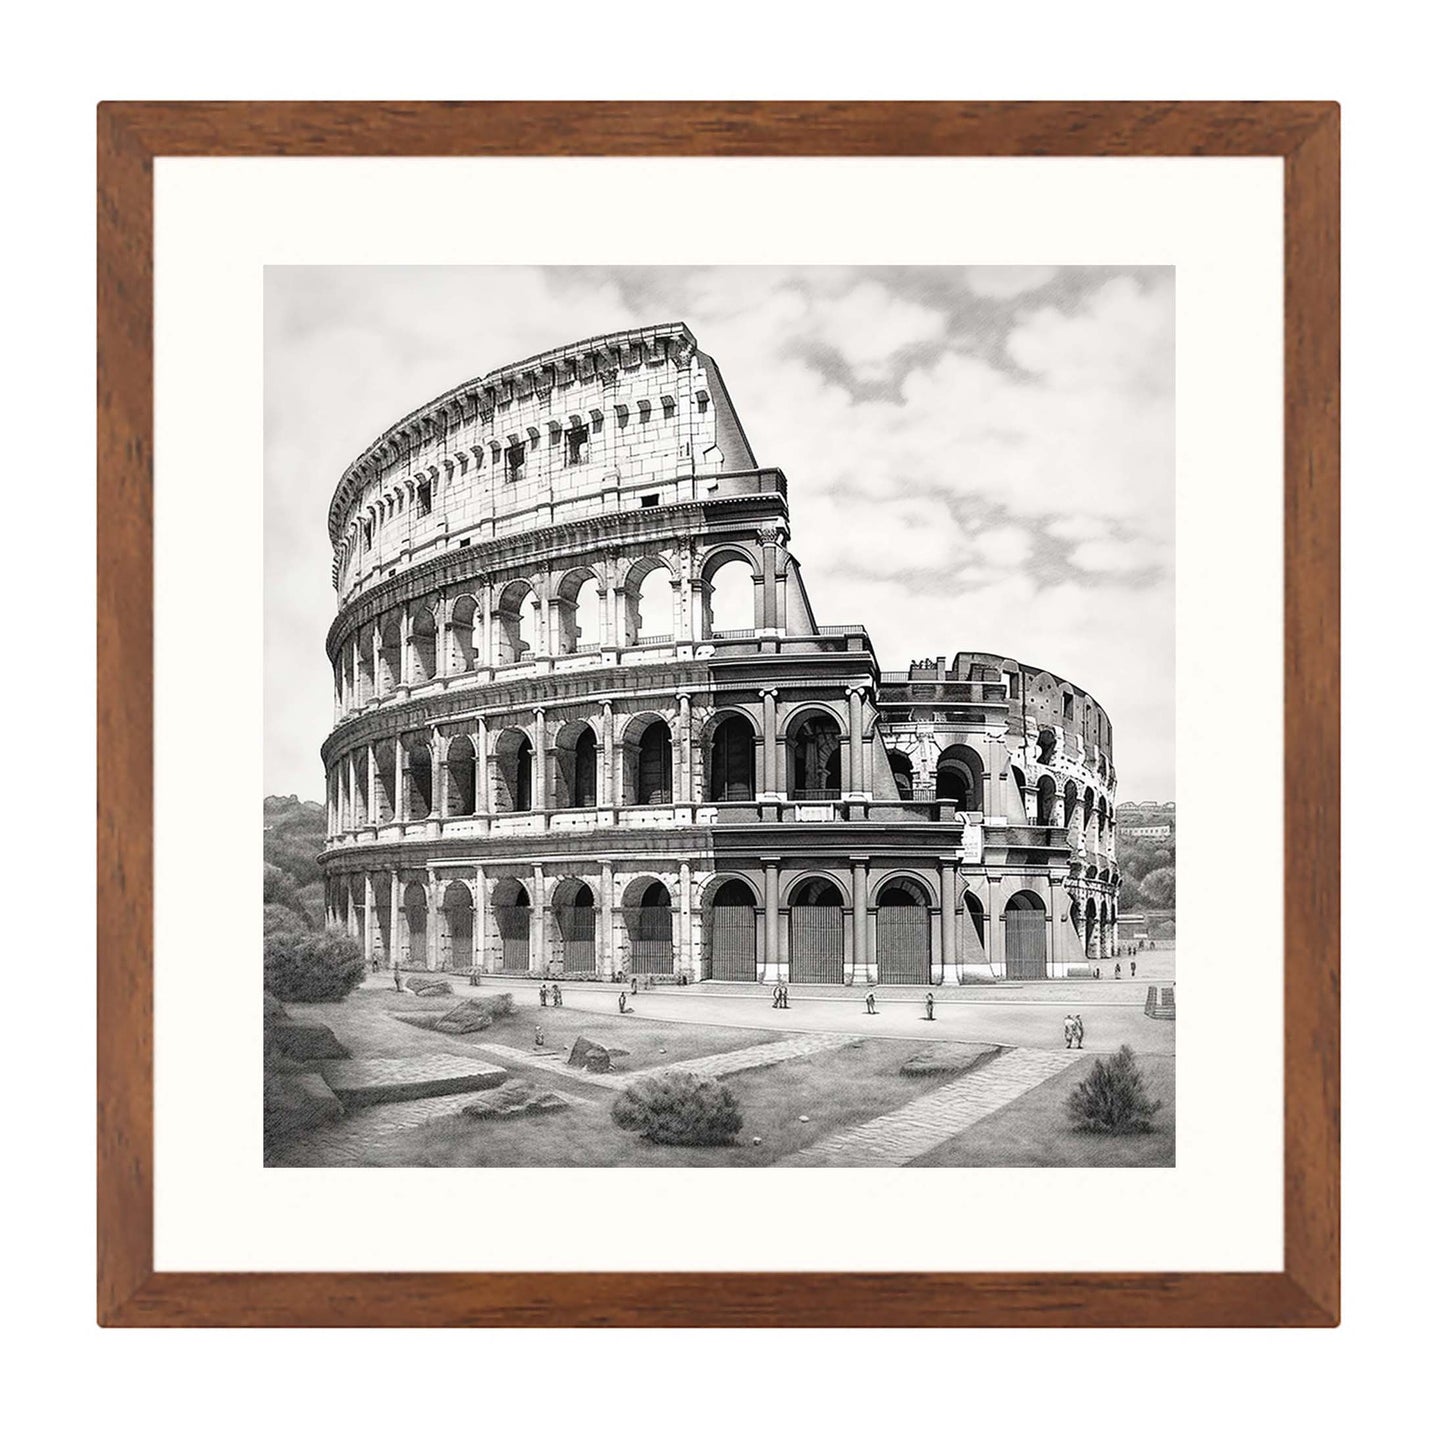 Rome Colosseum - mural in the style of a drawing